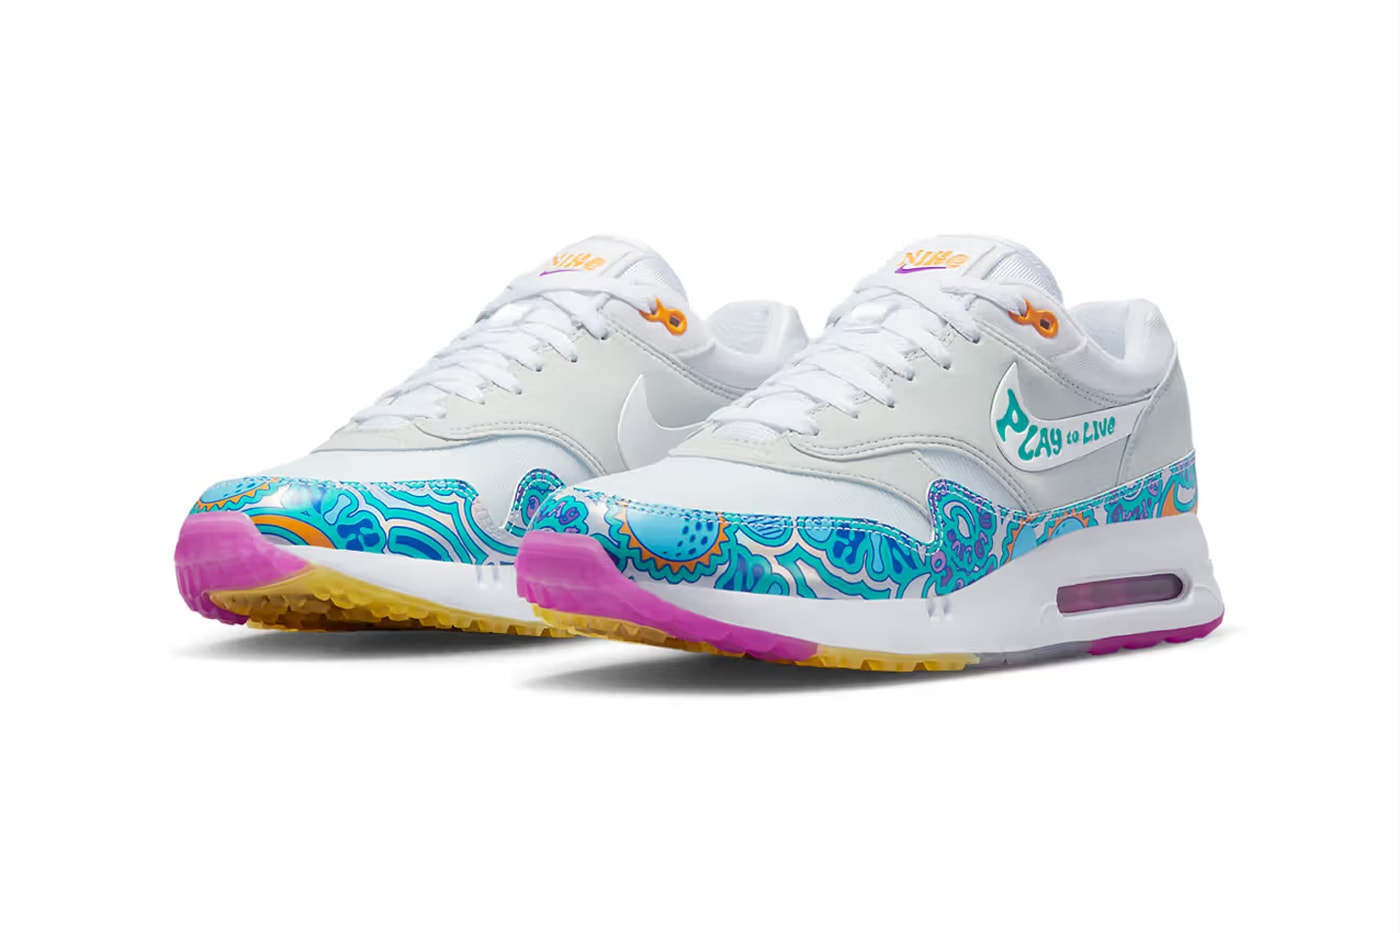 nike air max 1 golf play to live dv1407 100 official images release date information store list guide